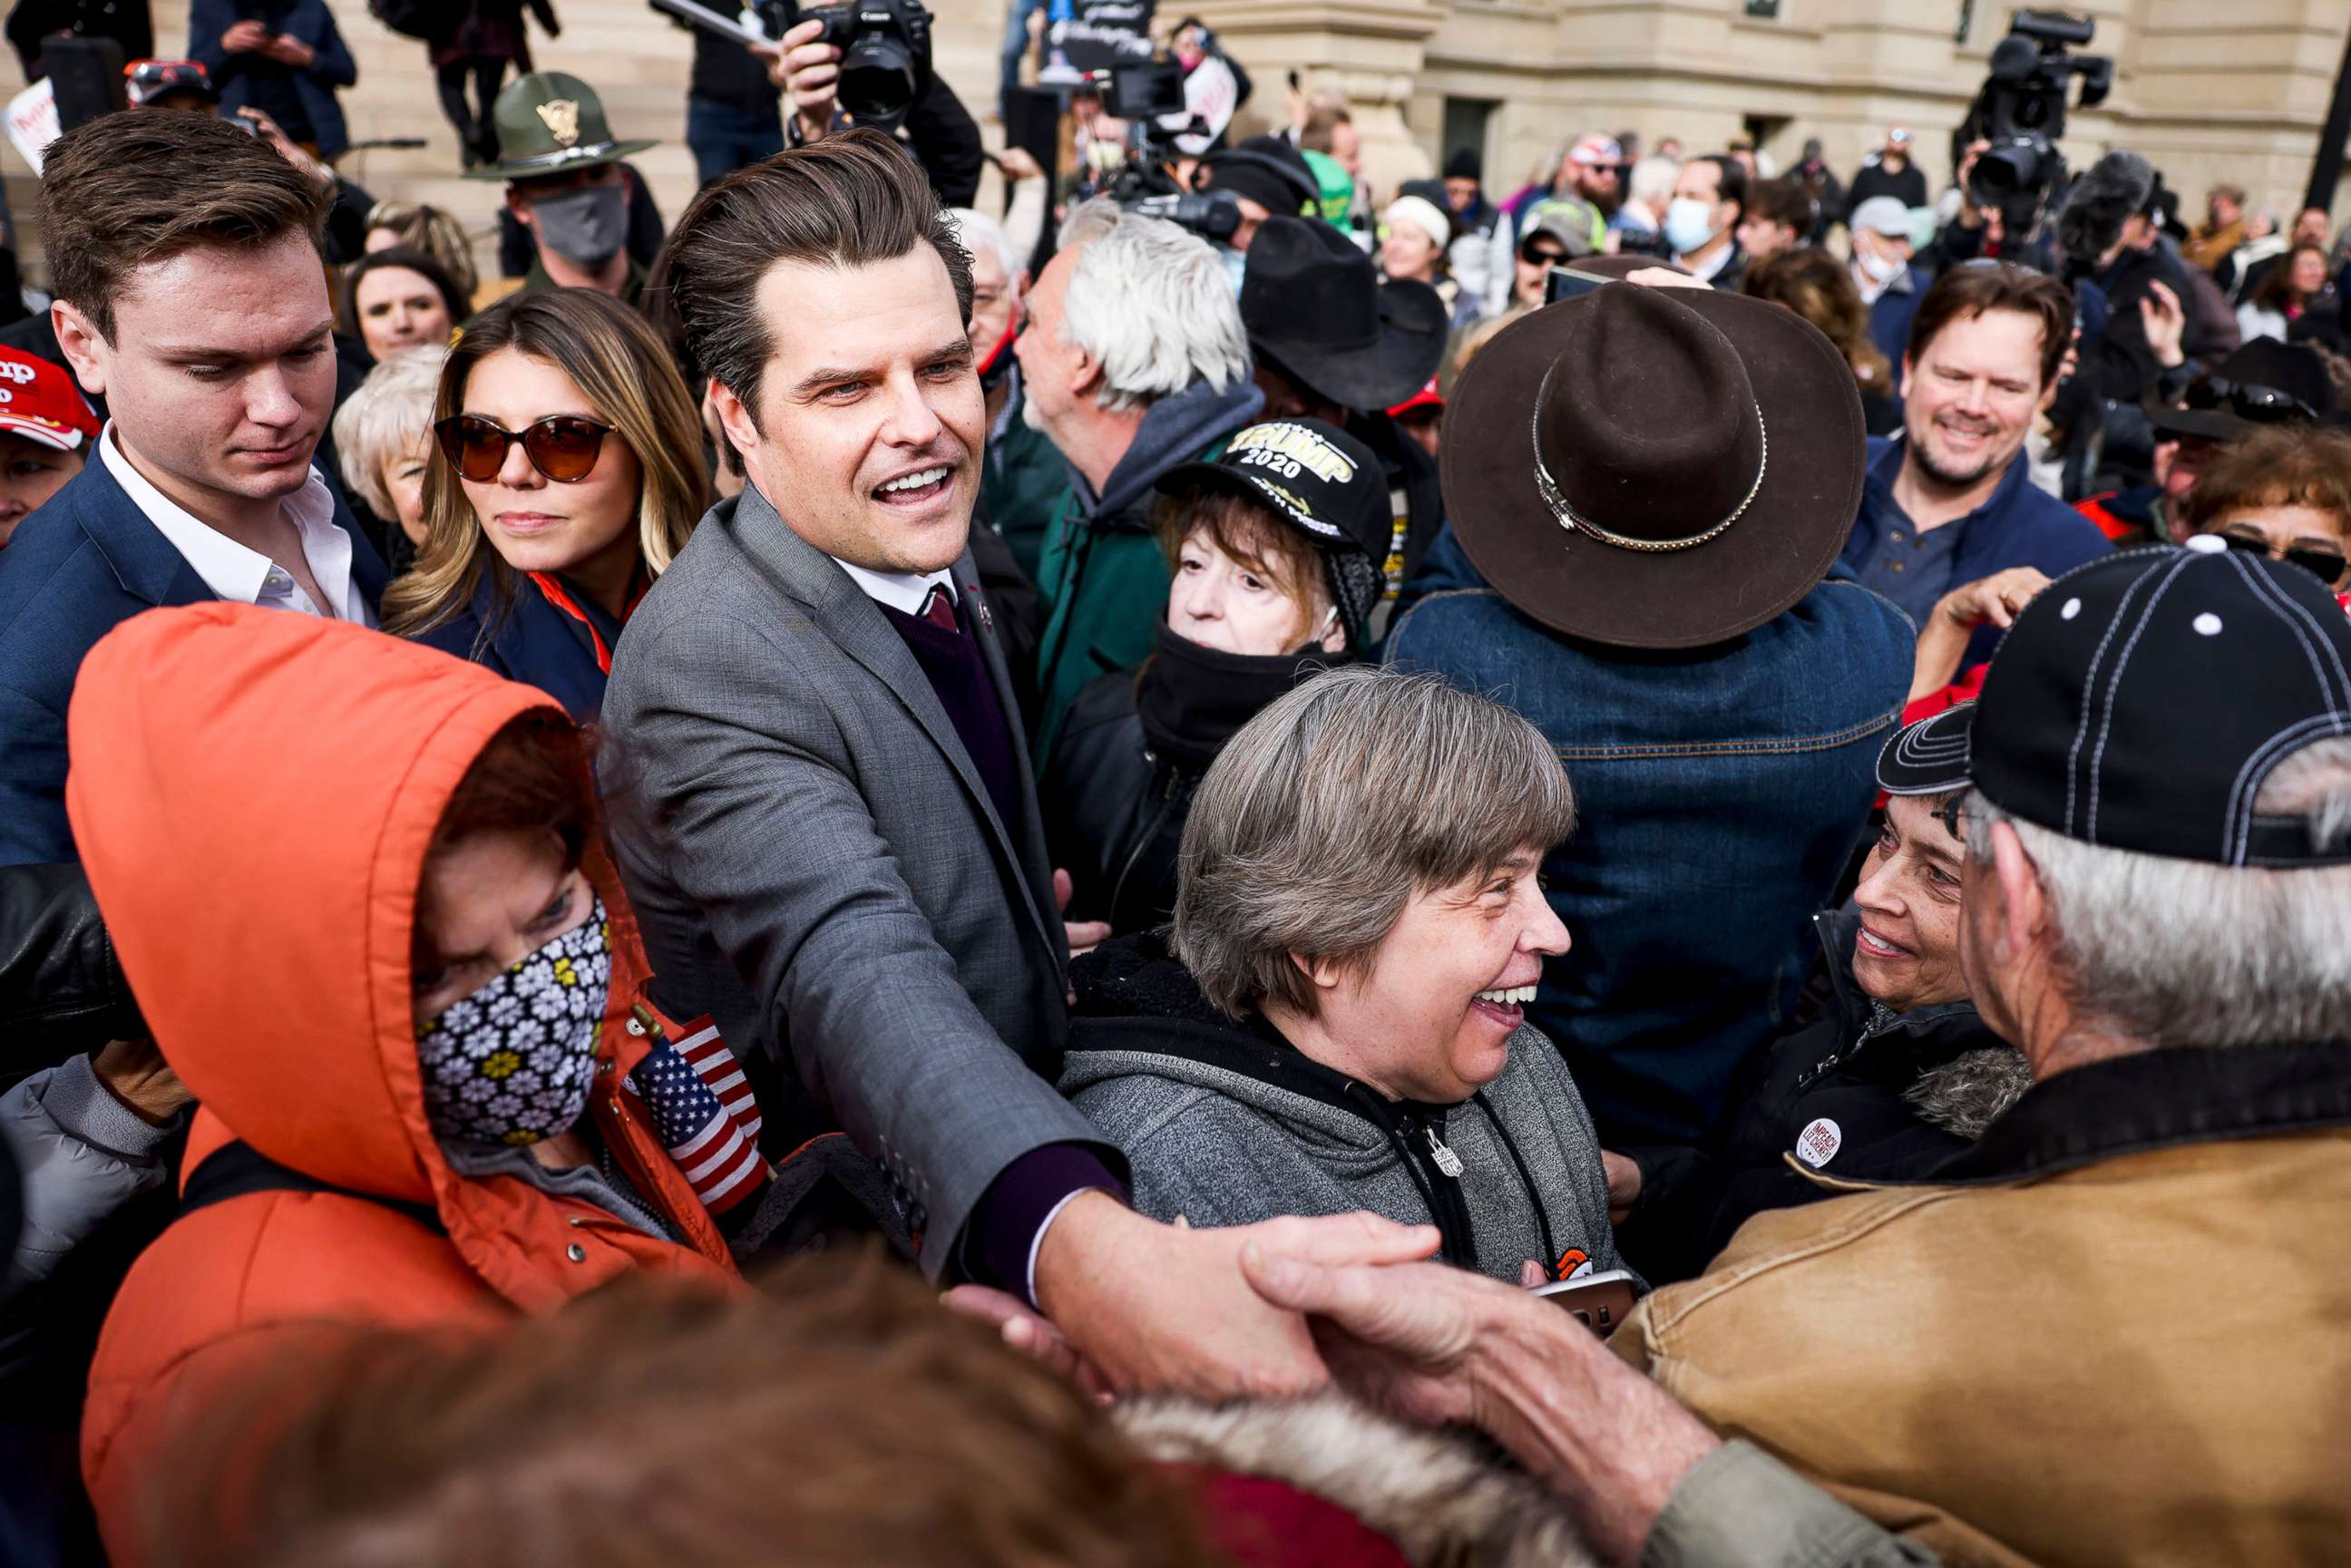 PHOTO: Rep. Matt Gaetz greets supporters after speaking to a crowd during a rally against Rep. Liz Cheney in Cheyenne, Wyo, Jan. 28, 2021.